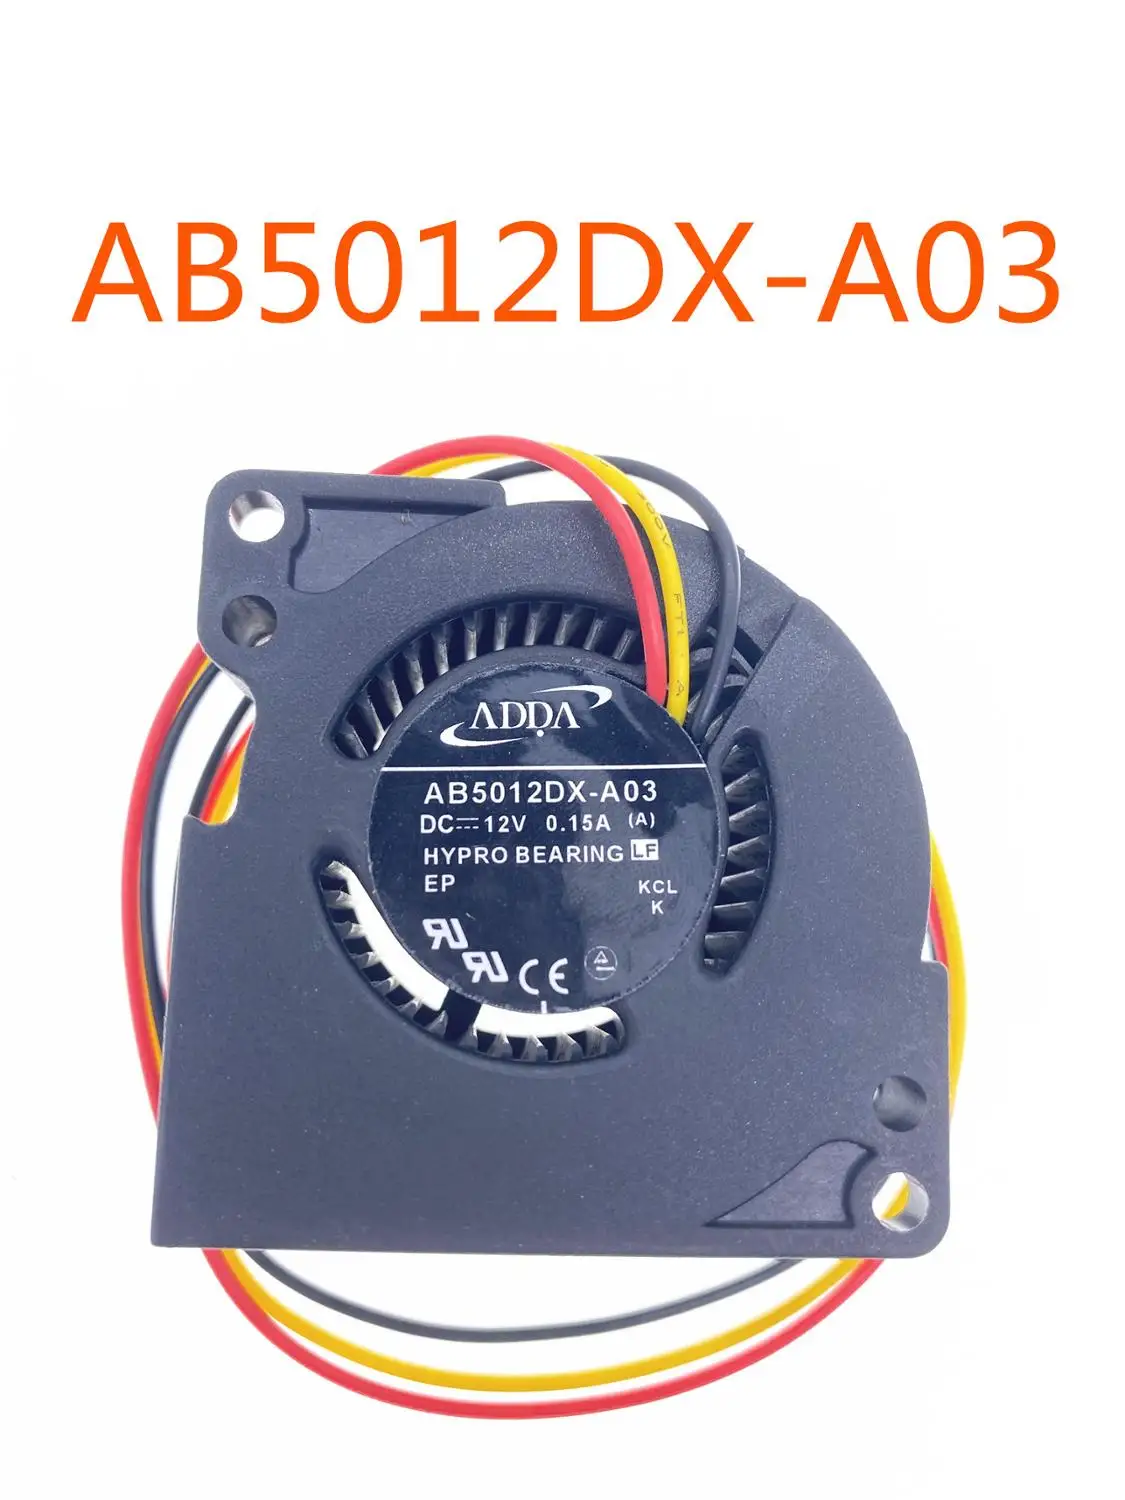 

For ADDA AB5012DX-A03 (A) DC 12V 0.15A 3-wire Server Cooling Fan